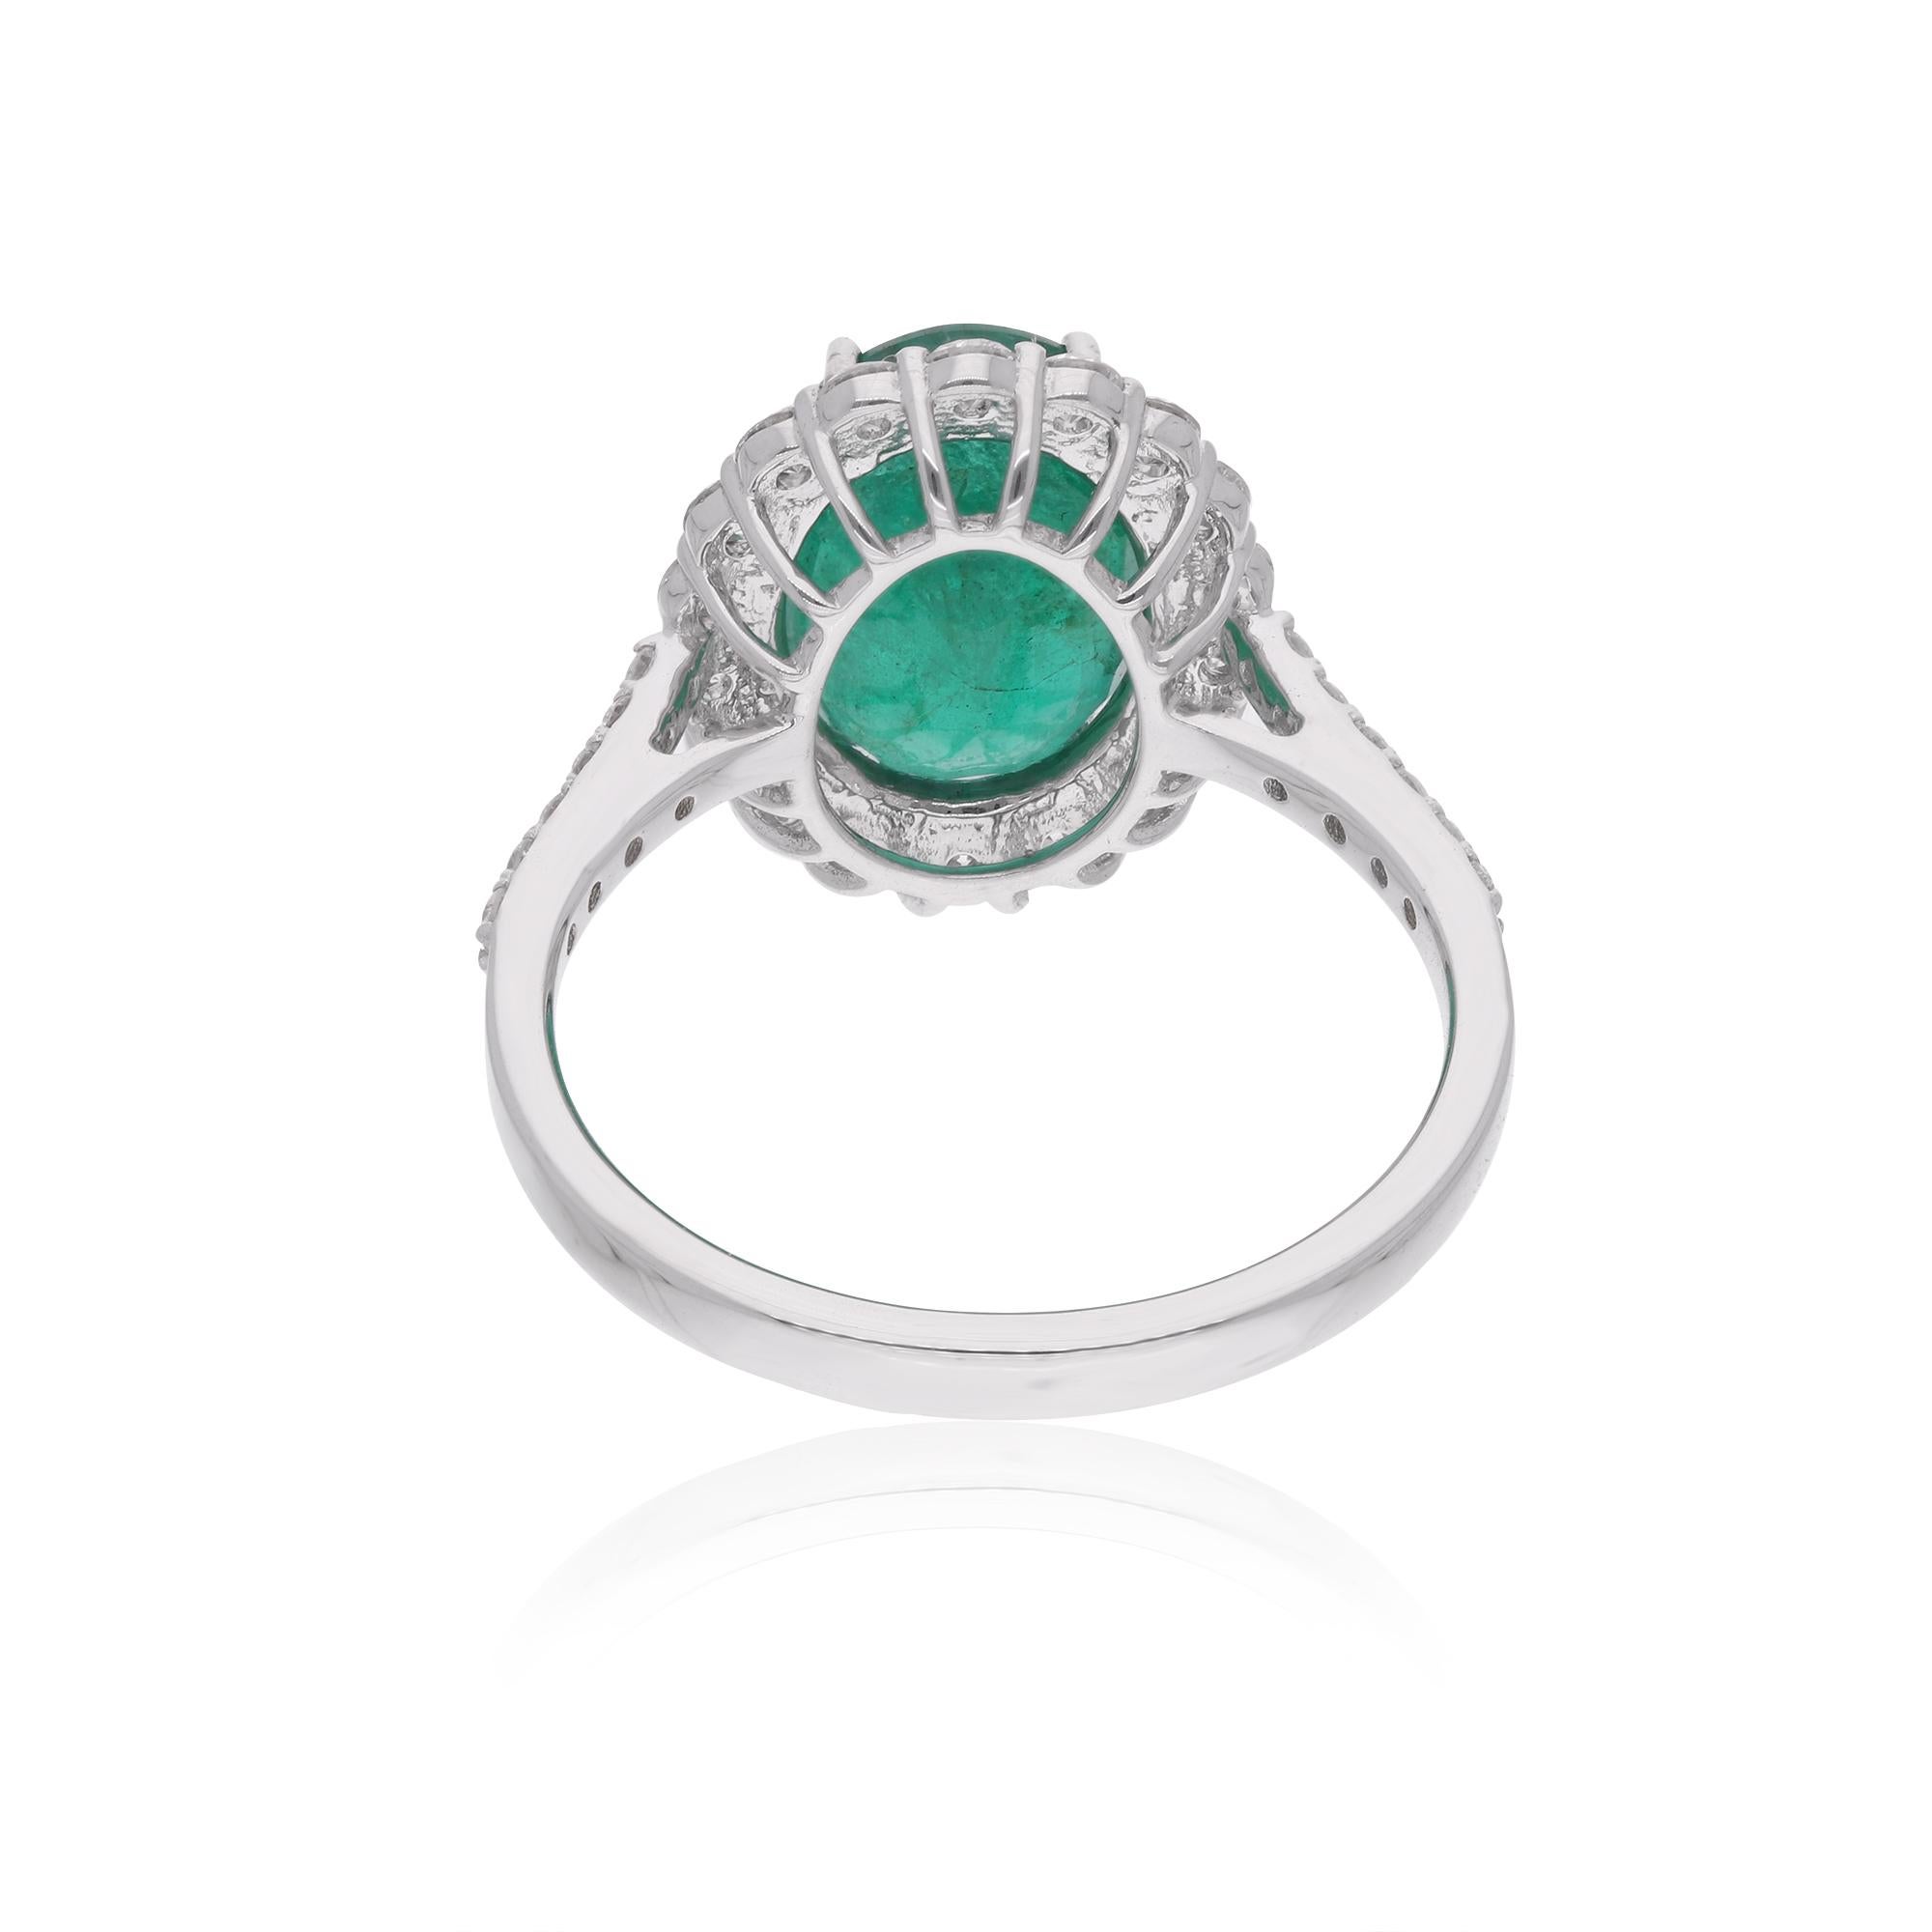 Step into the world of luxury with this breathtaking Zambian Emerald Gemstone Cocktail Ring, crafted in 14 karat white gold and adorned with dazzling diamonds. The centerpiece of this exquisite ring is a captivating Zambian emerald, renowned for its